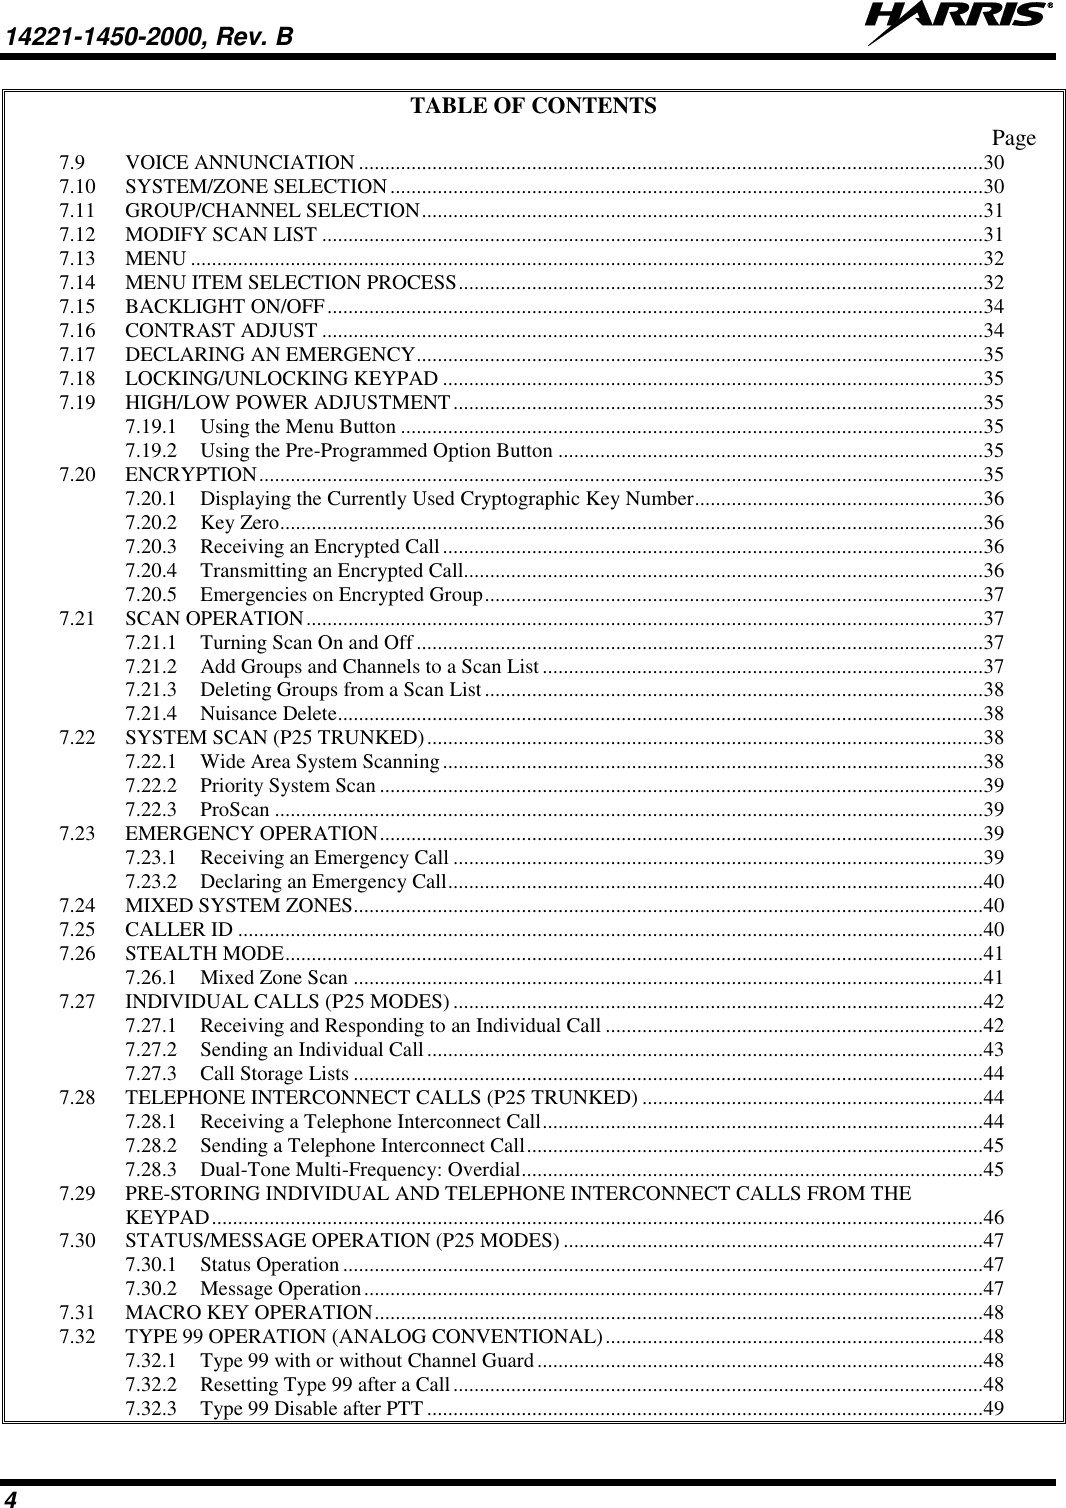 14221-1450-2000, Rev. B   4 TABLE OF CONTENTS Page 7.9 VOICE ANNUNCIATION ....................................................................................................................... 30 7.10 SYSTEM/ZONE SELECTION ................................................................................................................. 30 7.11 GROUP/CHANNEL SELECTION ........................................................................................................... 31 7.12 MODIFY SCAN LIST .............................................................................................................................. 31 7.13 MENU ....................................................................................................................................................... 32 7.14 MENU ITEM SELECTION PROCESS .................................................................................................... 32 7.15 BACKLIGHT ON/OFF ............................................................................................................................. 34 7.16 CONTRAST ADJUST .............................................................................................................................. 34 7.17 DECLARING AN EMERGENCY ............................................................................................................ 35 7.18 LOCKING/UNLOCKING KEYPAD ....................................................................................................... 35 7.19 HIGH/LOW POWER ADJUSTMENT ..................................................................................................... 35 7.19.1 Using the Menu Button ............................................................................................................... 35 7.19.2 Using the Pre-Programmed Option Button ................................................................................. 35 7.20 ENCRYPTION .......................................................................................................................................... 35 7.20.1 Displaying the Currently Used Cryptographic Key Number....................................................... 36 7.20.2 Key Zero ...................................................................................................................................... 36 7.20.3 Receiving an Encrypted Call ....................................................................................................... 36 7.20.4 Transmitting an Encrypted Call................................................................................................... 36 7.20.5 Emergencies on Encrypted Group ............................................................................................... 37 7.21 SCAN OPERATION ................................................................................................................................. 37 7.21.1 Turning Scan On and Off ............................................................................................................ 37 7.21.2 Add Groups and Channels to a Scan List .................................................................................... 37 7.21.3 Deleting Groups from a Scan List ............................................................................................... 38 7.21.4 Nuisance Delete ........................................................................................................................... 38 7.22 SYSTEM SCAN (P25 TRUNKED) .......................................................................................................... 38 7.22.1 Wide Area System Scanning ....................................................................................................... 38 7.22.2 Priority System Scan ................................................................................................................... 39 7.22.3 ProScan ....................................................................................................................................... 39 7.23 EMERGENCY OPERATION ................................................................................................................... 39 7.23.1 Receiving an Emergency Call ..................................................................................................... 39 7.23.2 Declaring an Emergency Call ...................................................................................................... 40 7.24 MIXED SYSTEM ZONES........................................................................................................................ 40 7.25 CALLER ID .............................................................................................................................................. 40 7.26 STEALTH MODE ..................................................................................................................................... 41 7.26.1 Mixed Zone Scan ........................................................................................................................ 41 7.27 INDIVIDUAL CALLS (P25 MODES) ..................................................................................................... 42 7.27.1 Receiving and Responding to an Individual Call ........................................................................ 42 7.27.2 Sending an Individual Call .......................................................................................................... 43 7.27.3 Call Storage Lists ........................................................................................................................ 44 7.28 TELEPHONE INTERCONNECT CALLS (P25 TRUNKED) ................................................................. 44 7.28.1 Receiving a Telephone Interconnect Call .................................................................................... 44 7.28.2 Sending a Telephone Interconnect Call ....................................................................................... 45 7.28.3 Dual-Tone Multi-Frequency: Overdial ........................................................................................ 45 7.29 PRE-STORING INDIVIDUAL AND TELEPHONE INTERCONNECT CALLS FROM THE KEYPAD ................................................................................................................................................... 46 7.30 STATUS/MESSAGE OPERATION (P25 MODES) ................................................................................ 47 7.30.1 Status Operation .......................................................................................................................... 47 7.30.2 Message Operation ...................................................................................................................... 47 7.31 MACRO KEY OPERATION .................................................................................................................... 48 7.32 TYPE 99 OPERATION (ANALOG CONVENTIONAL) ........................................................................ 48 7.32.1 Type 99 with or without Channel Guard ..................................................................................... 48 7.32.2 Resetting Type 99 after a Call ..................................................................................................... 48 7.32.3 Type 99 Disable after PTT .......................................................................................................... 49 